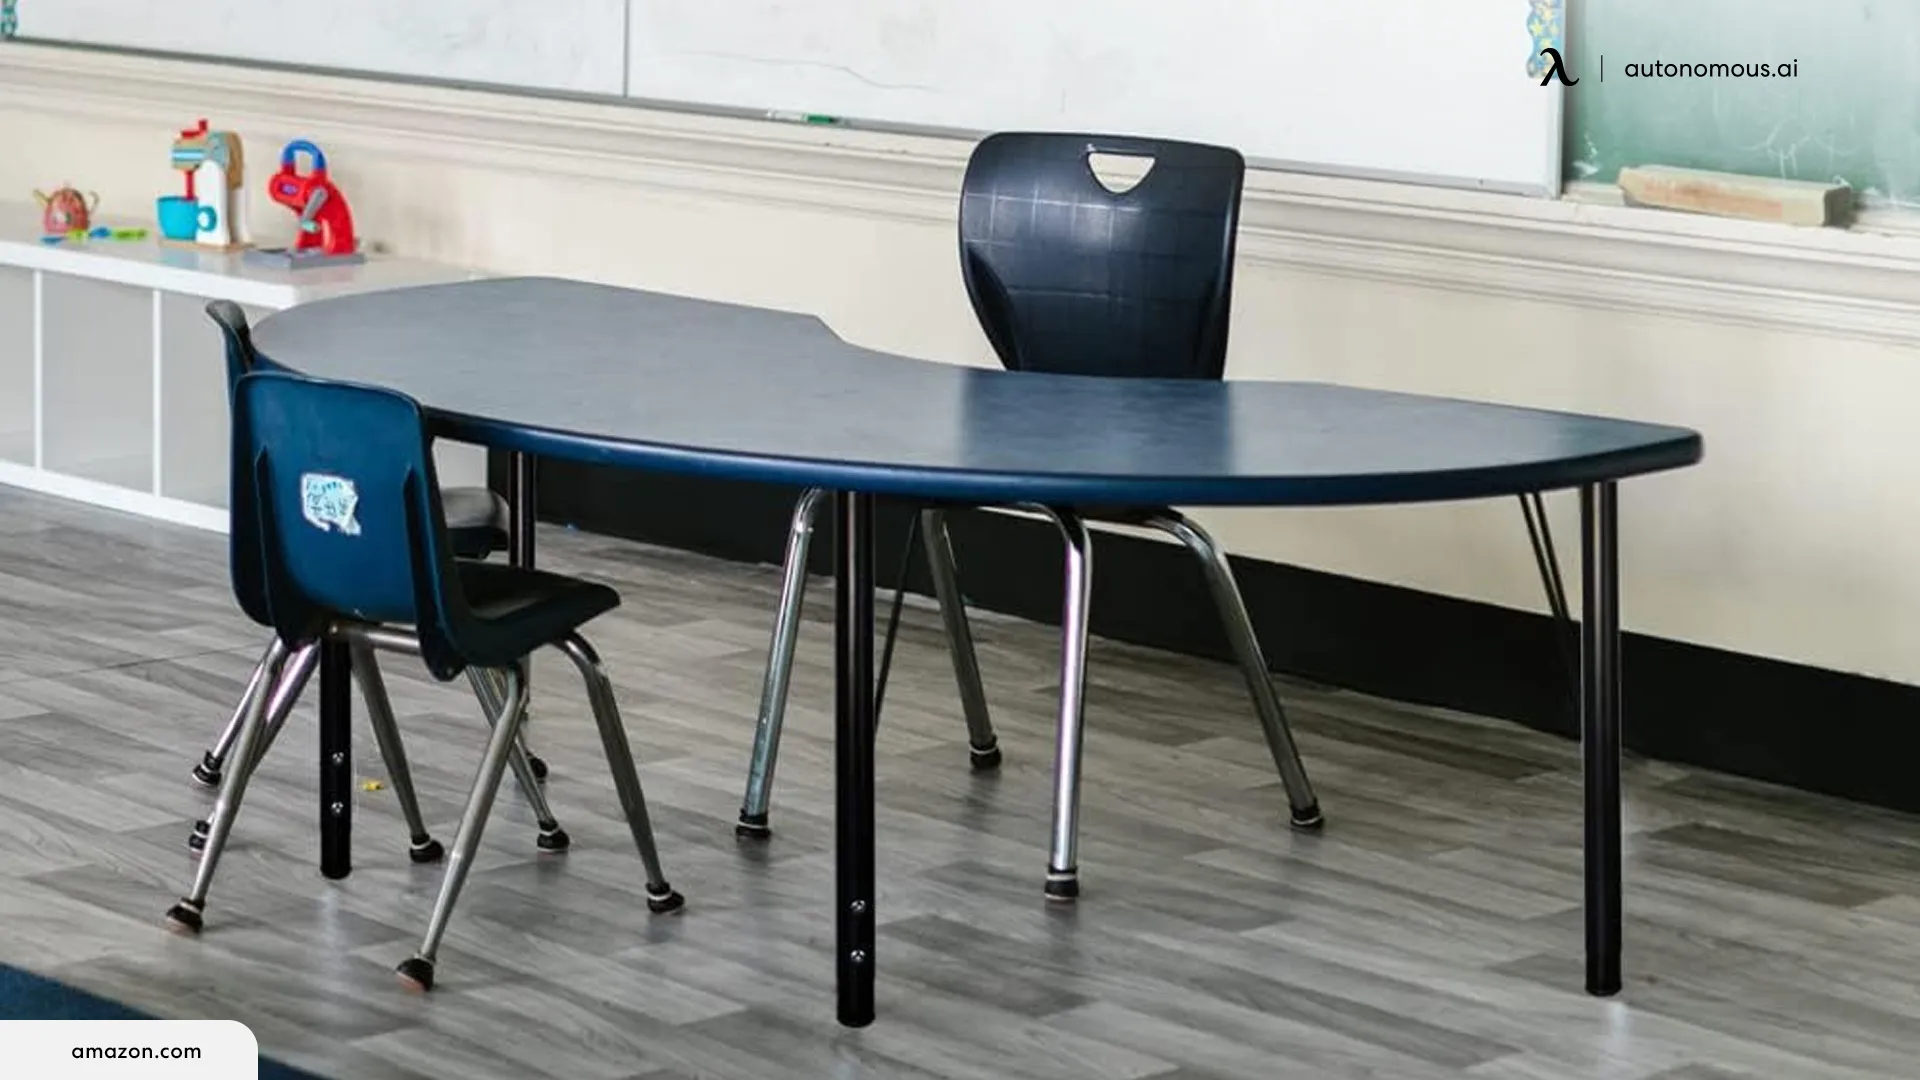 Desks with Adjustable Table Legs: Tips for Choosing the Best Ones